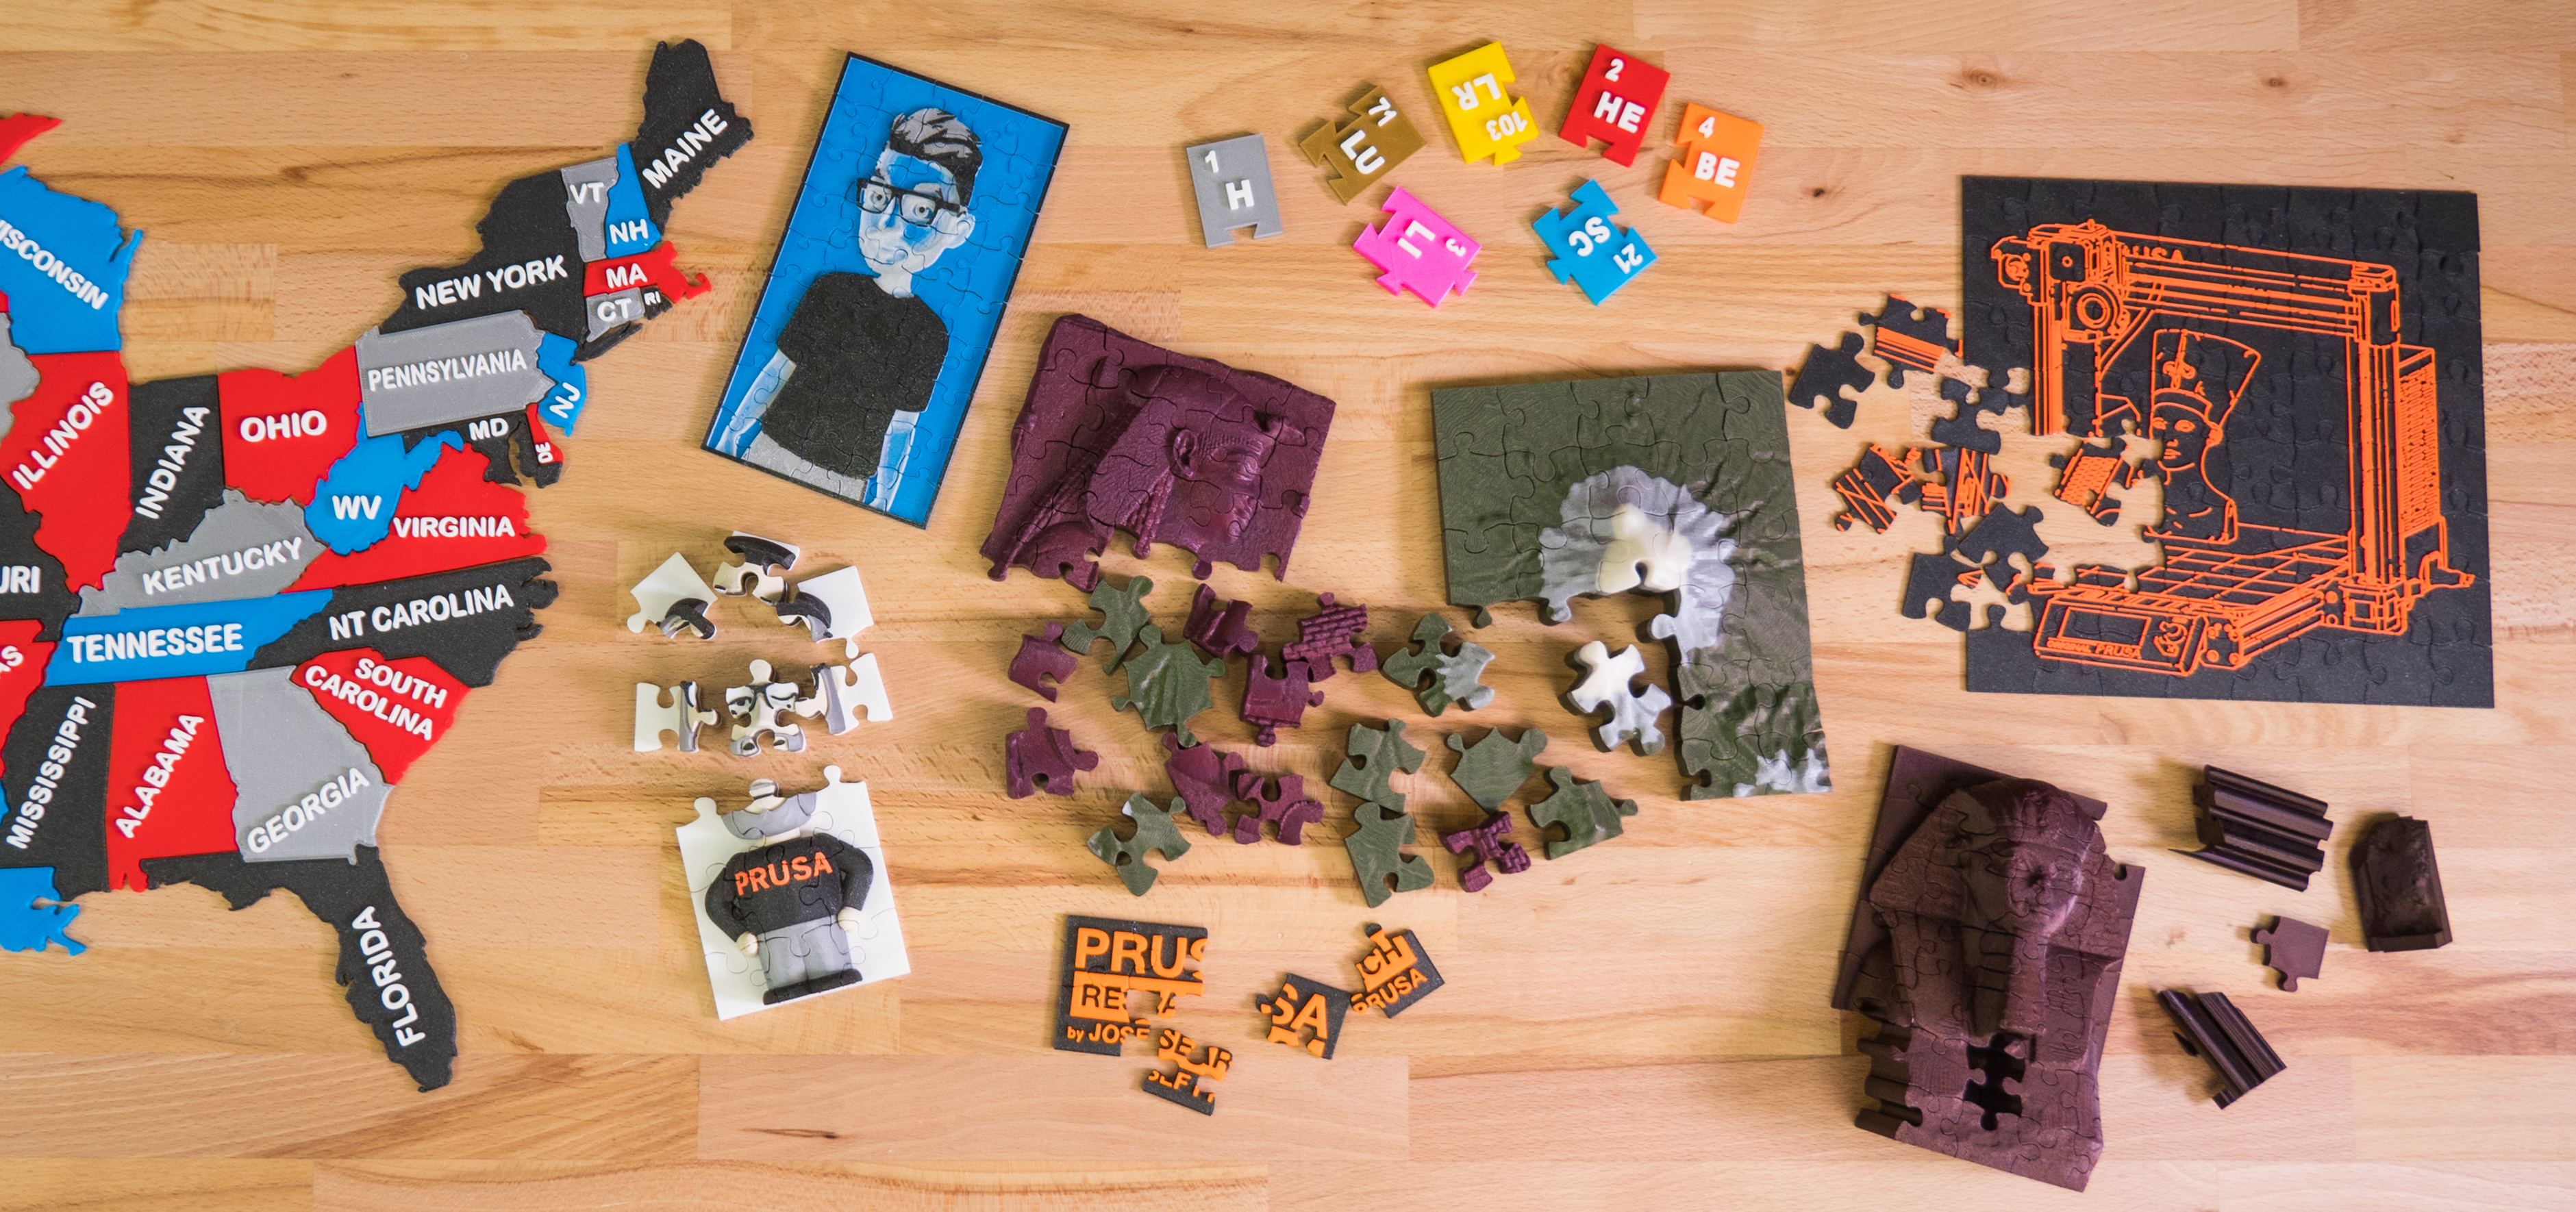 Create And Print Your Own 3D Jigsaw Puzzles! - Prusa Printers - Print Your Puzzle